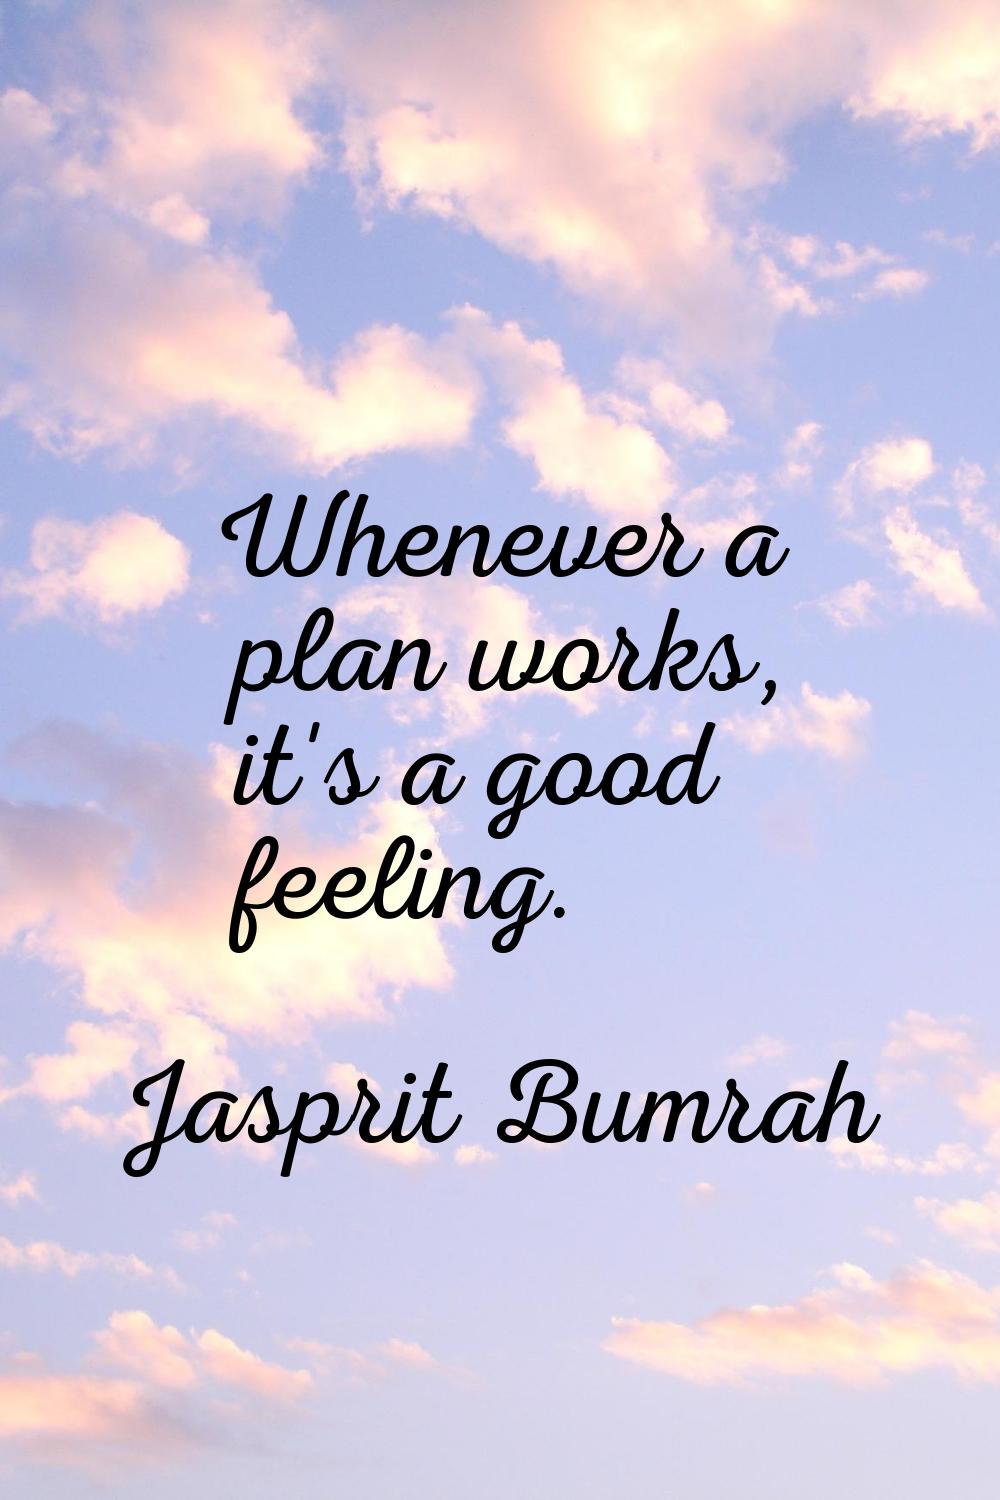 Whenever a plan works, it's a good feeling.